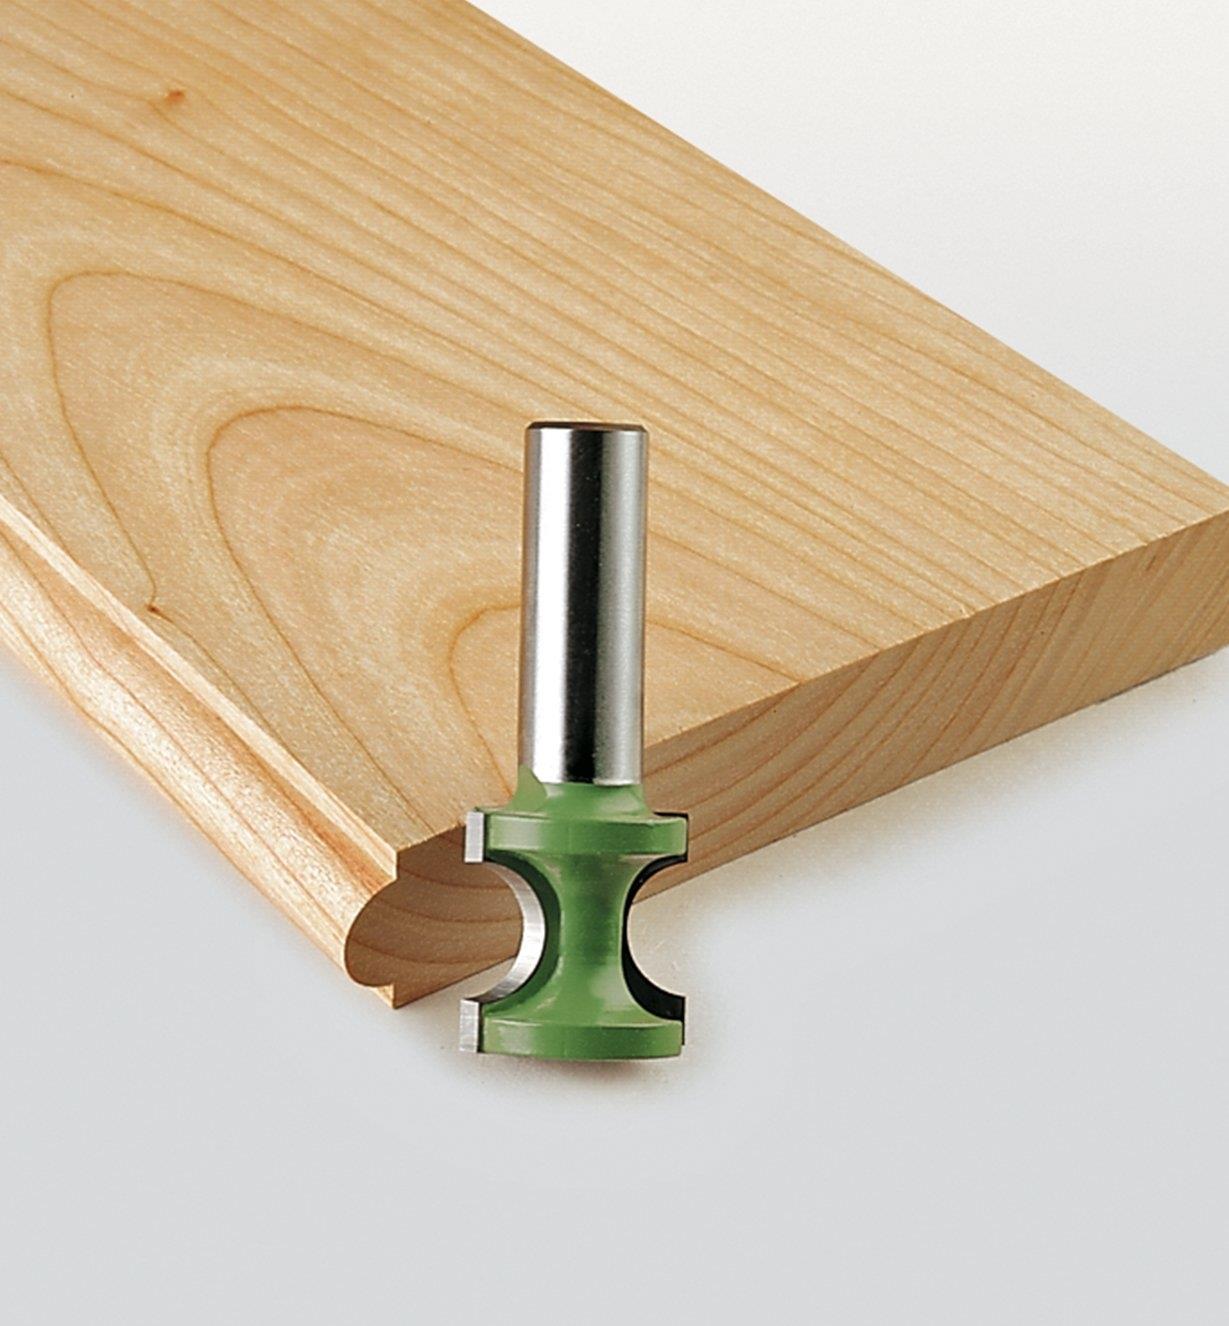 External bull-nose bit next to a board with a profile cut into it